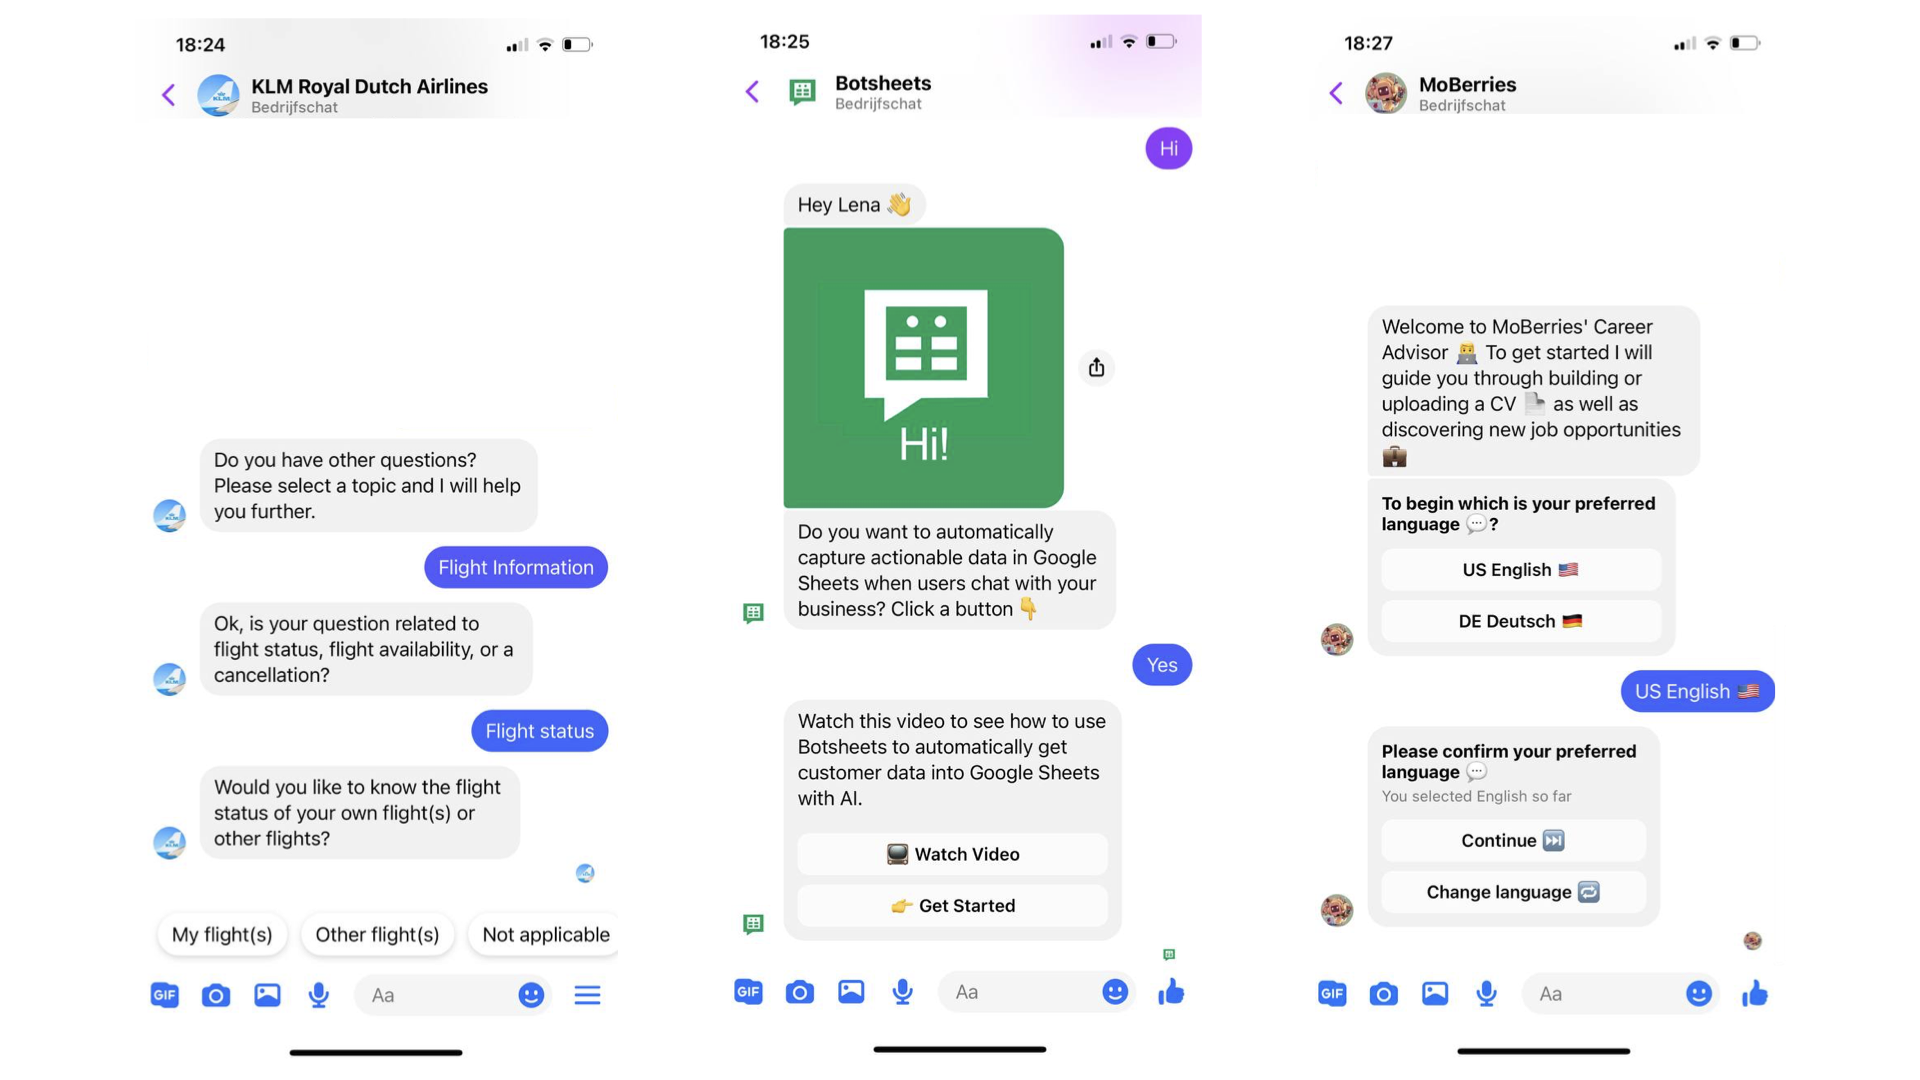 Examples of button-based chatbots